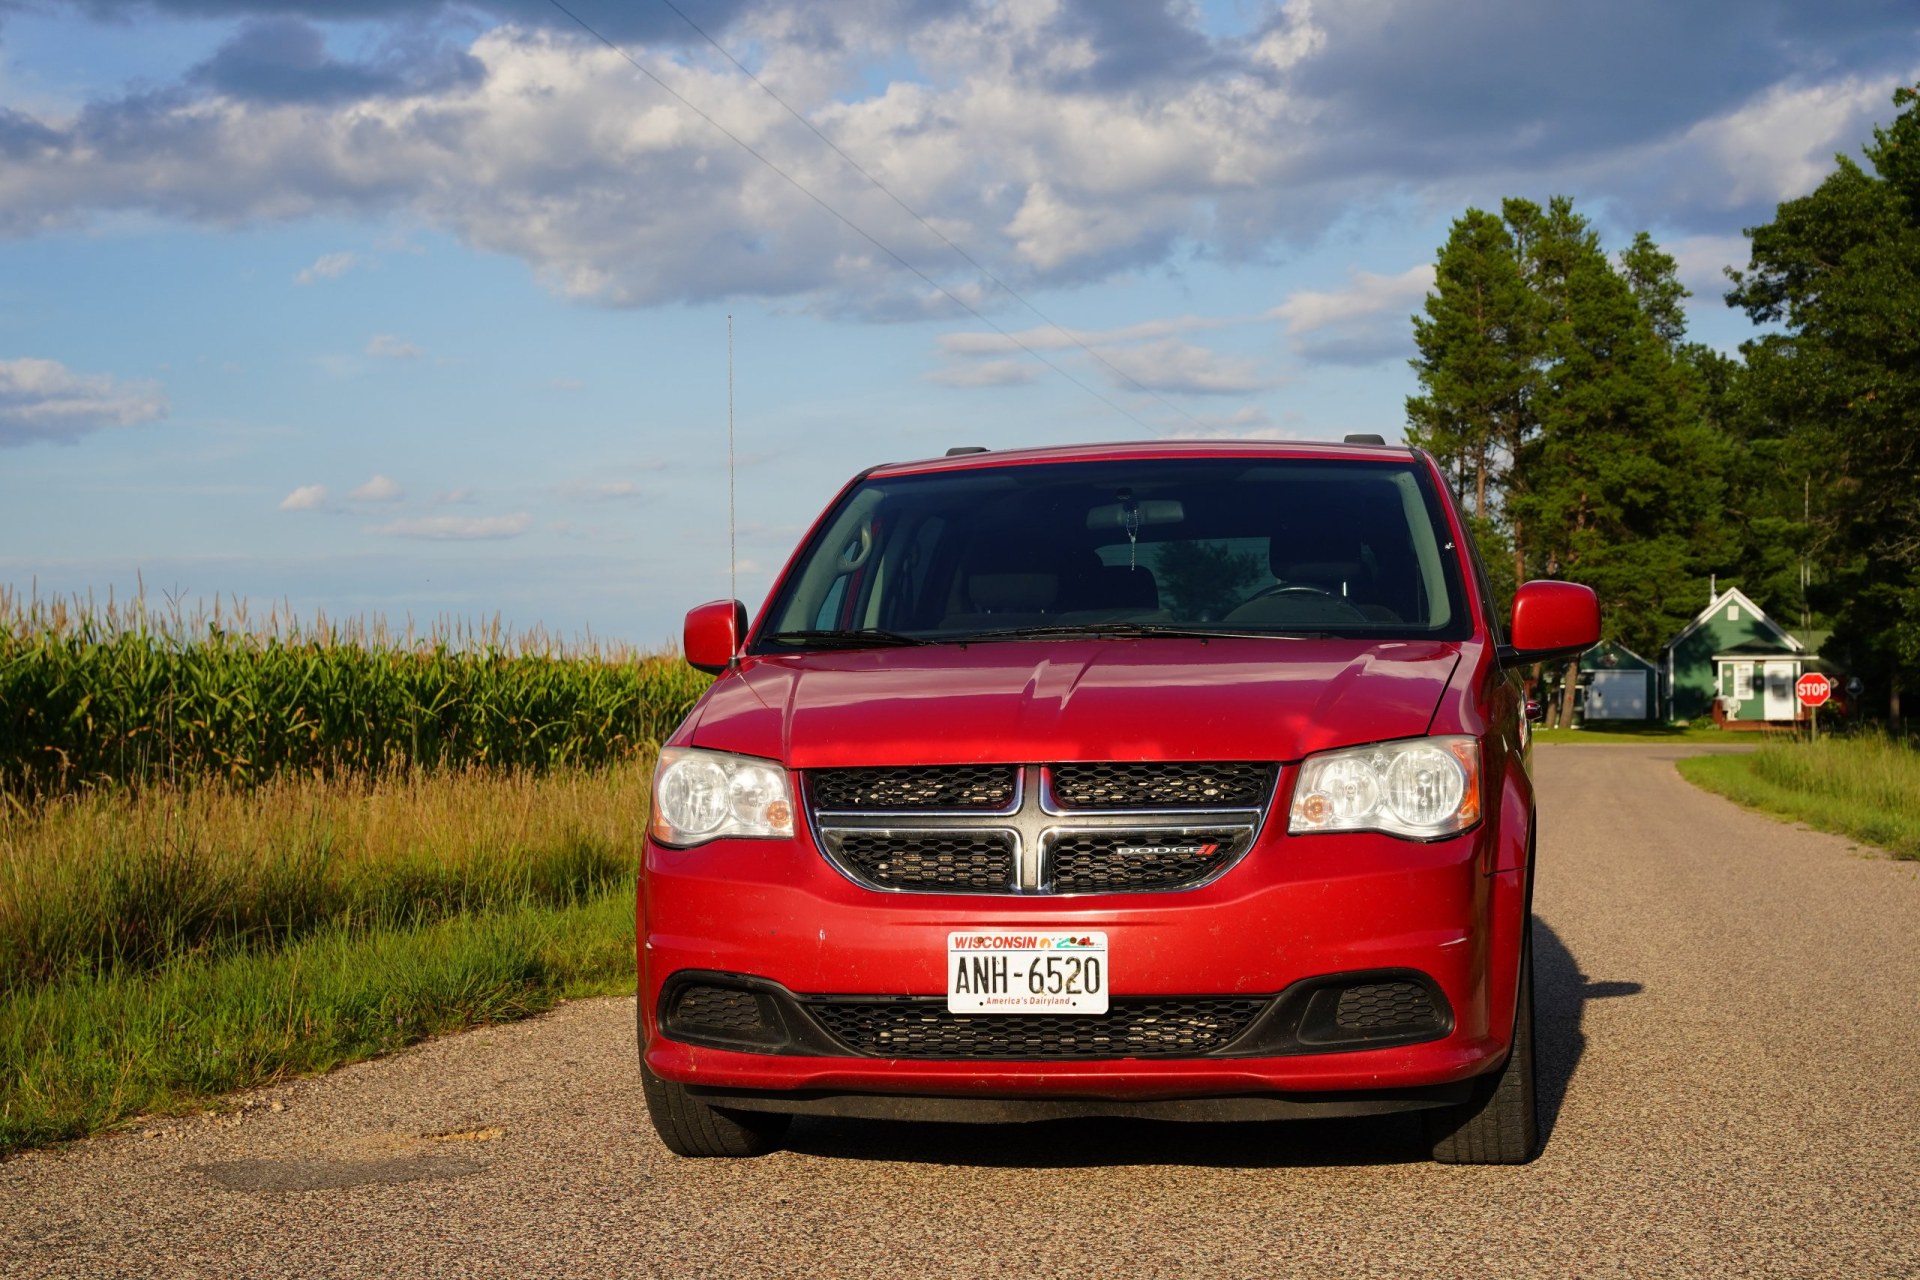 2013 family passenger Red Dodge Grand Caravan sits parked in the countryside